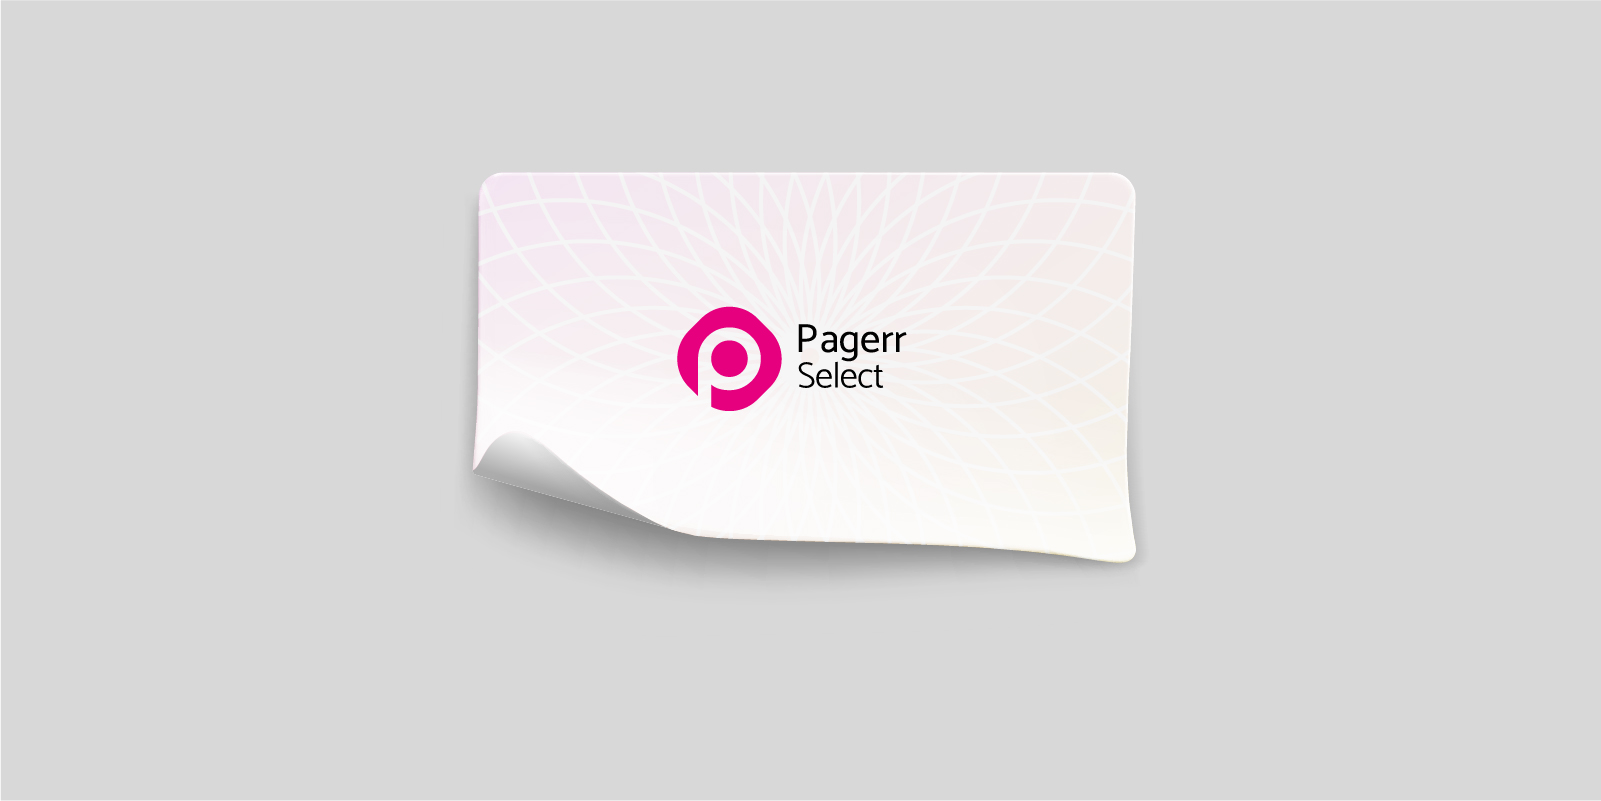 Sheet stickers in Toowoomba - Print with Pagerr